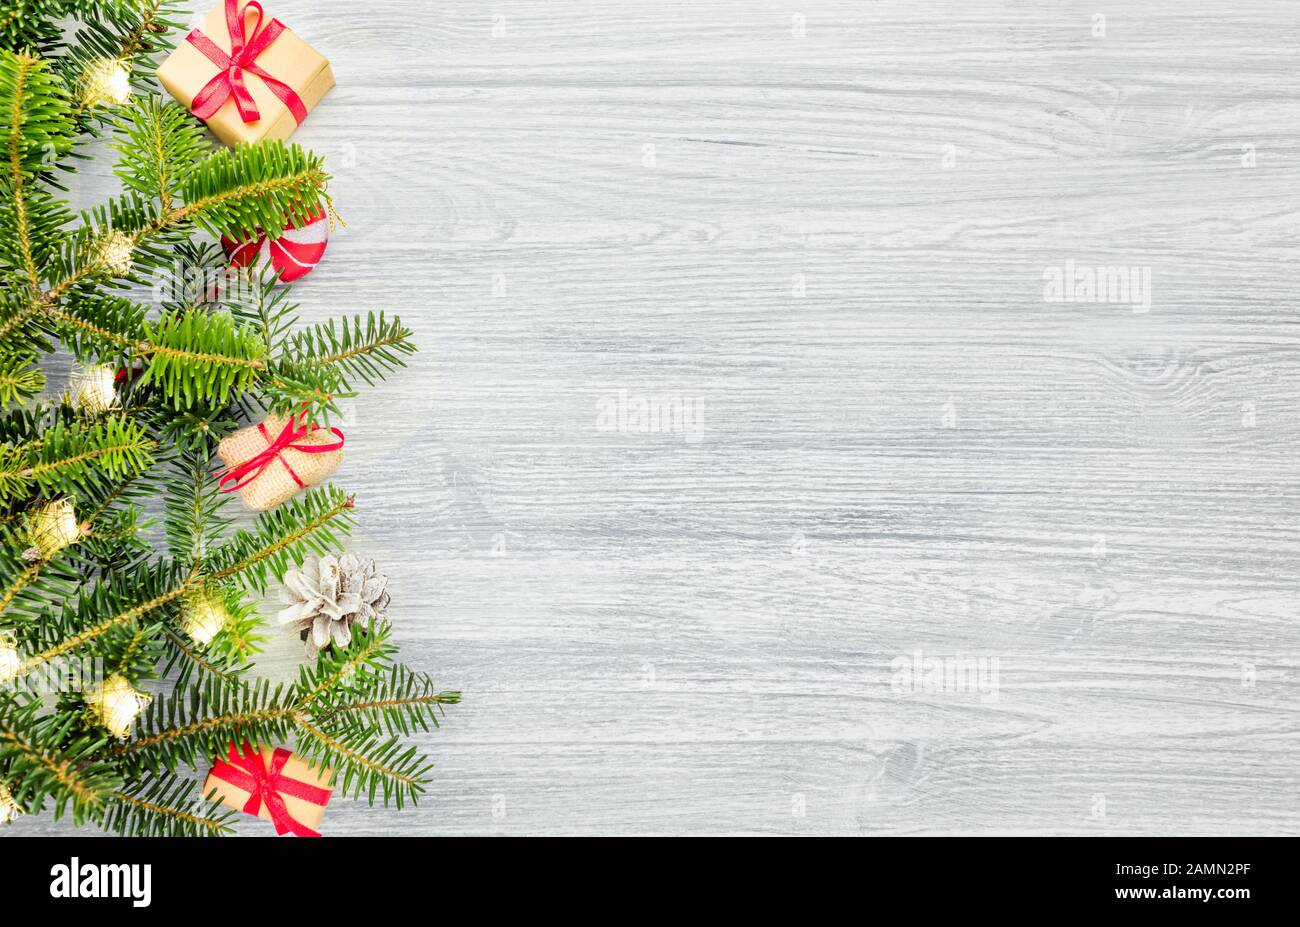 Christmas fir tree on a wooden background Stock Photo